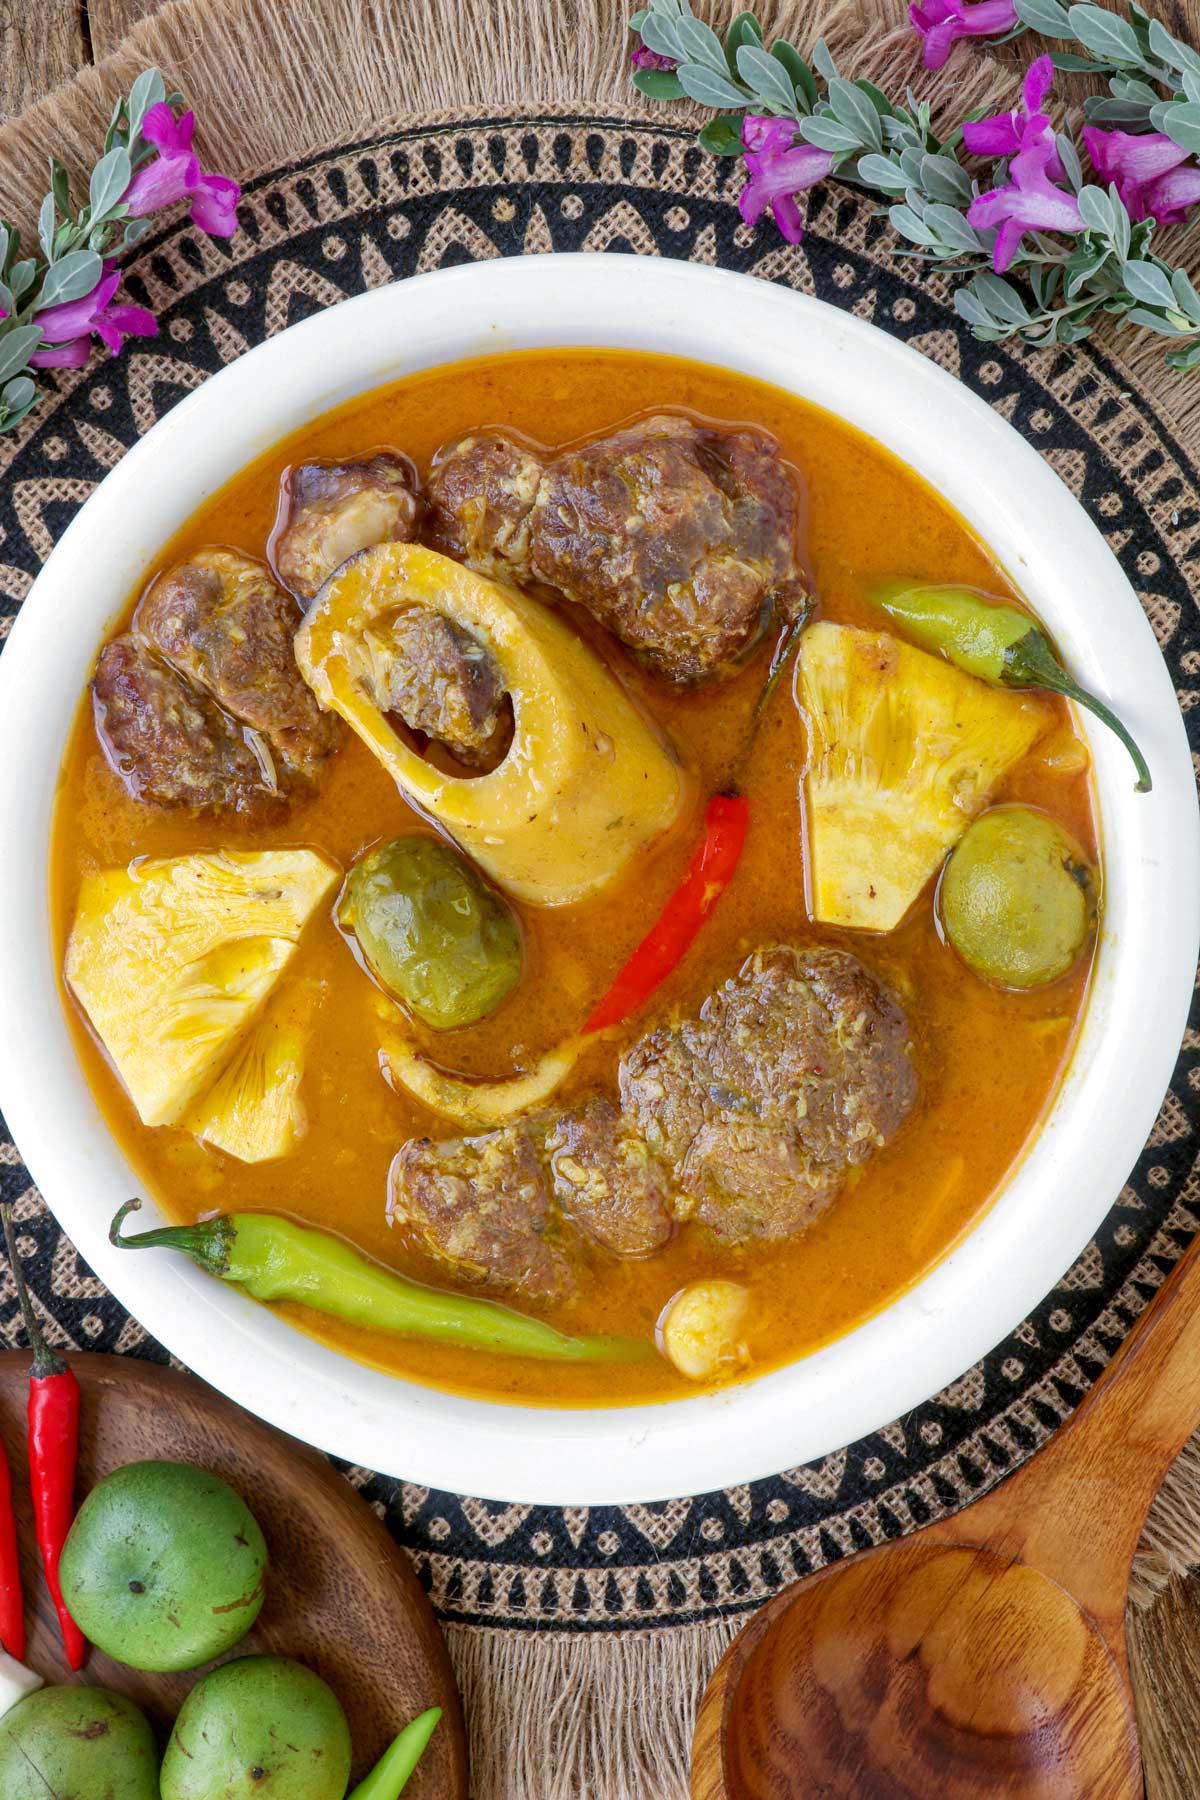 Kansi in a serving bowl made with beef shanks, green jackfruit, batwan, and chilis.